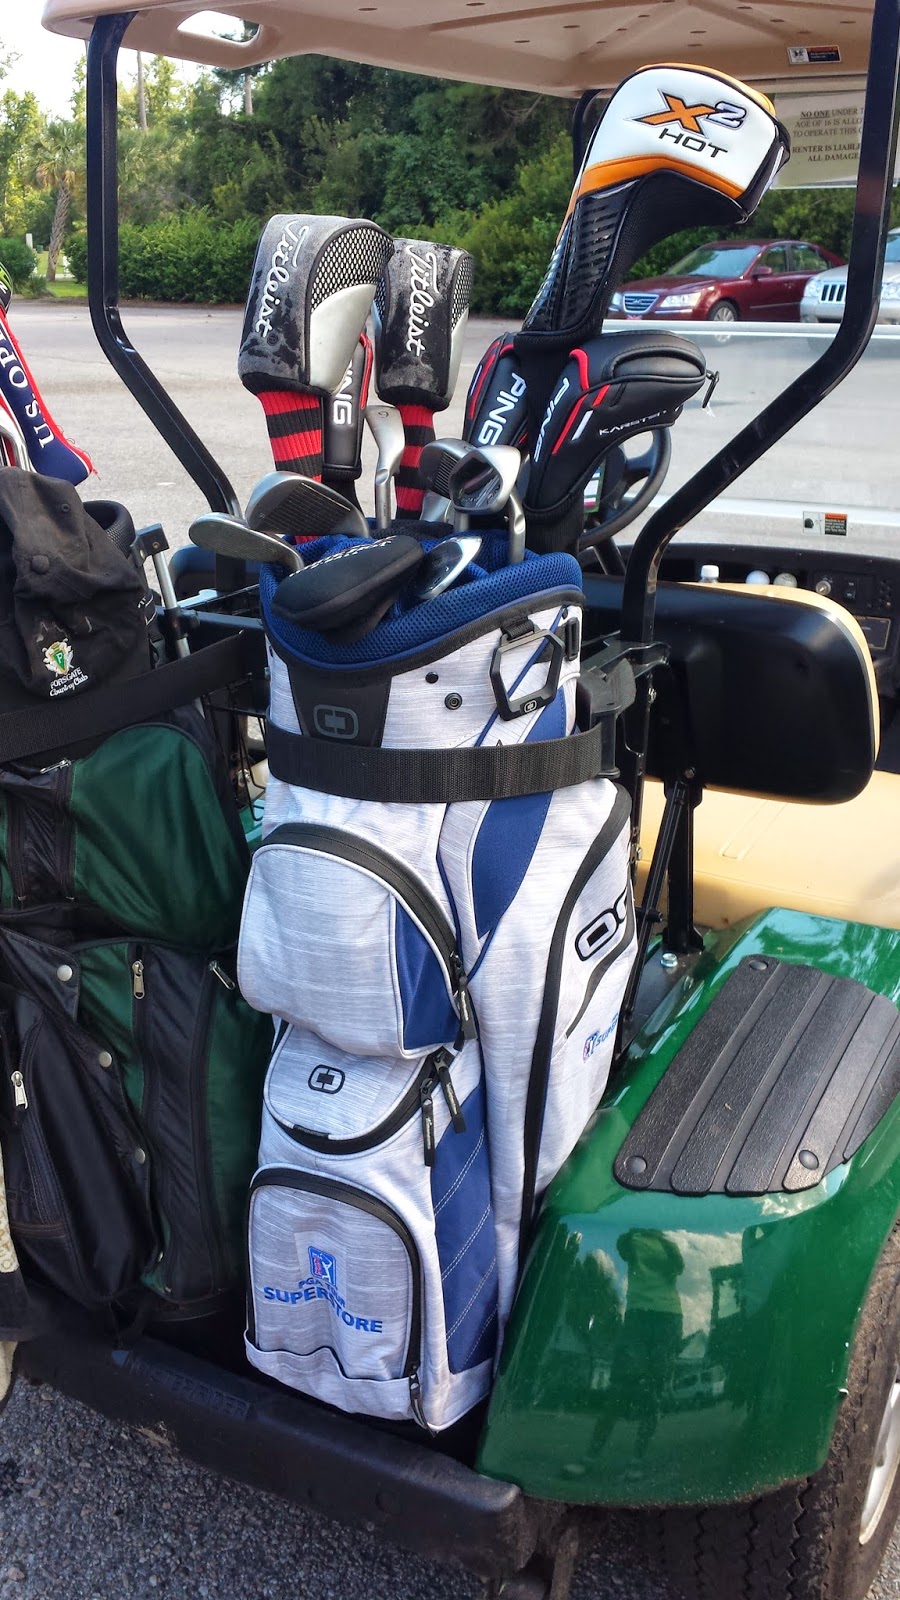 Golf for Beginners: Do You Know What's In YOUR #Golf Bag?